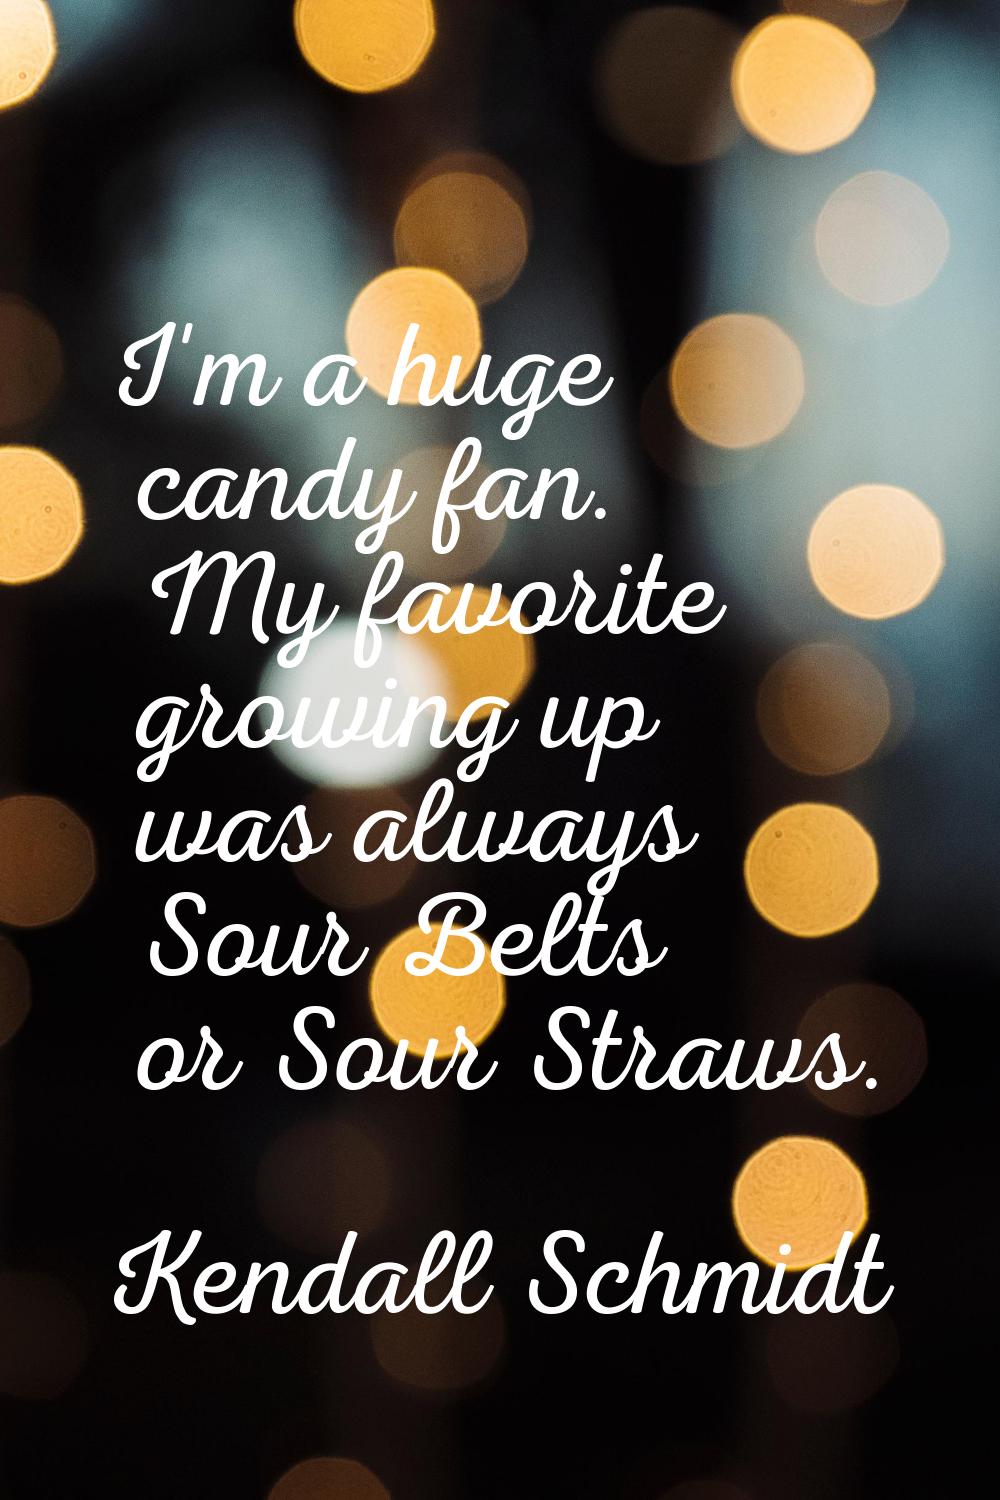 I'm a huge candy fan. My favorite growing up was always Sour Belts or Sour Straws.